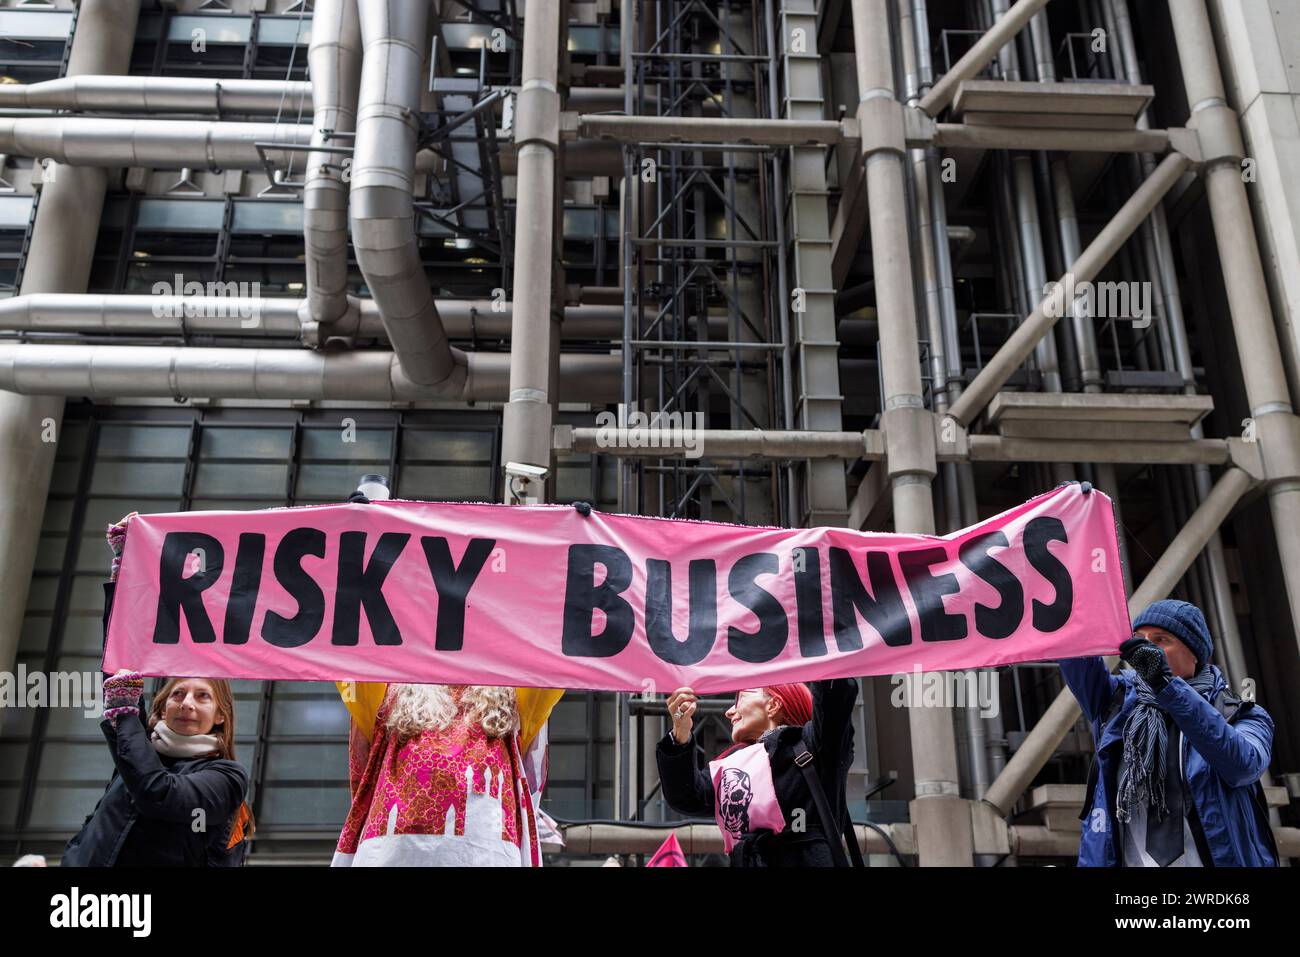 28th Feb. 2024. Lloyds of London Insurance Building, City of London‘.  Insure Our Future’ protestors surround Lloyds of London demanding they take immediate action to slow the climate crisis and support the urgent transition from dangerous fossil fuels to clean energy. The occupation is part of a global week of action organised by the Insure Our Future network, running from 26th Feb – 3rd March. Grassroots groups and activists from across the world are coming together to demand action, with events taking place in the UK, USA, Japan, South Korea, Uganda, DRC, Switzerland, France, Peru, Colombia Stock Photo